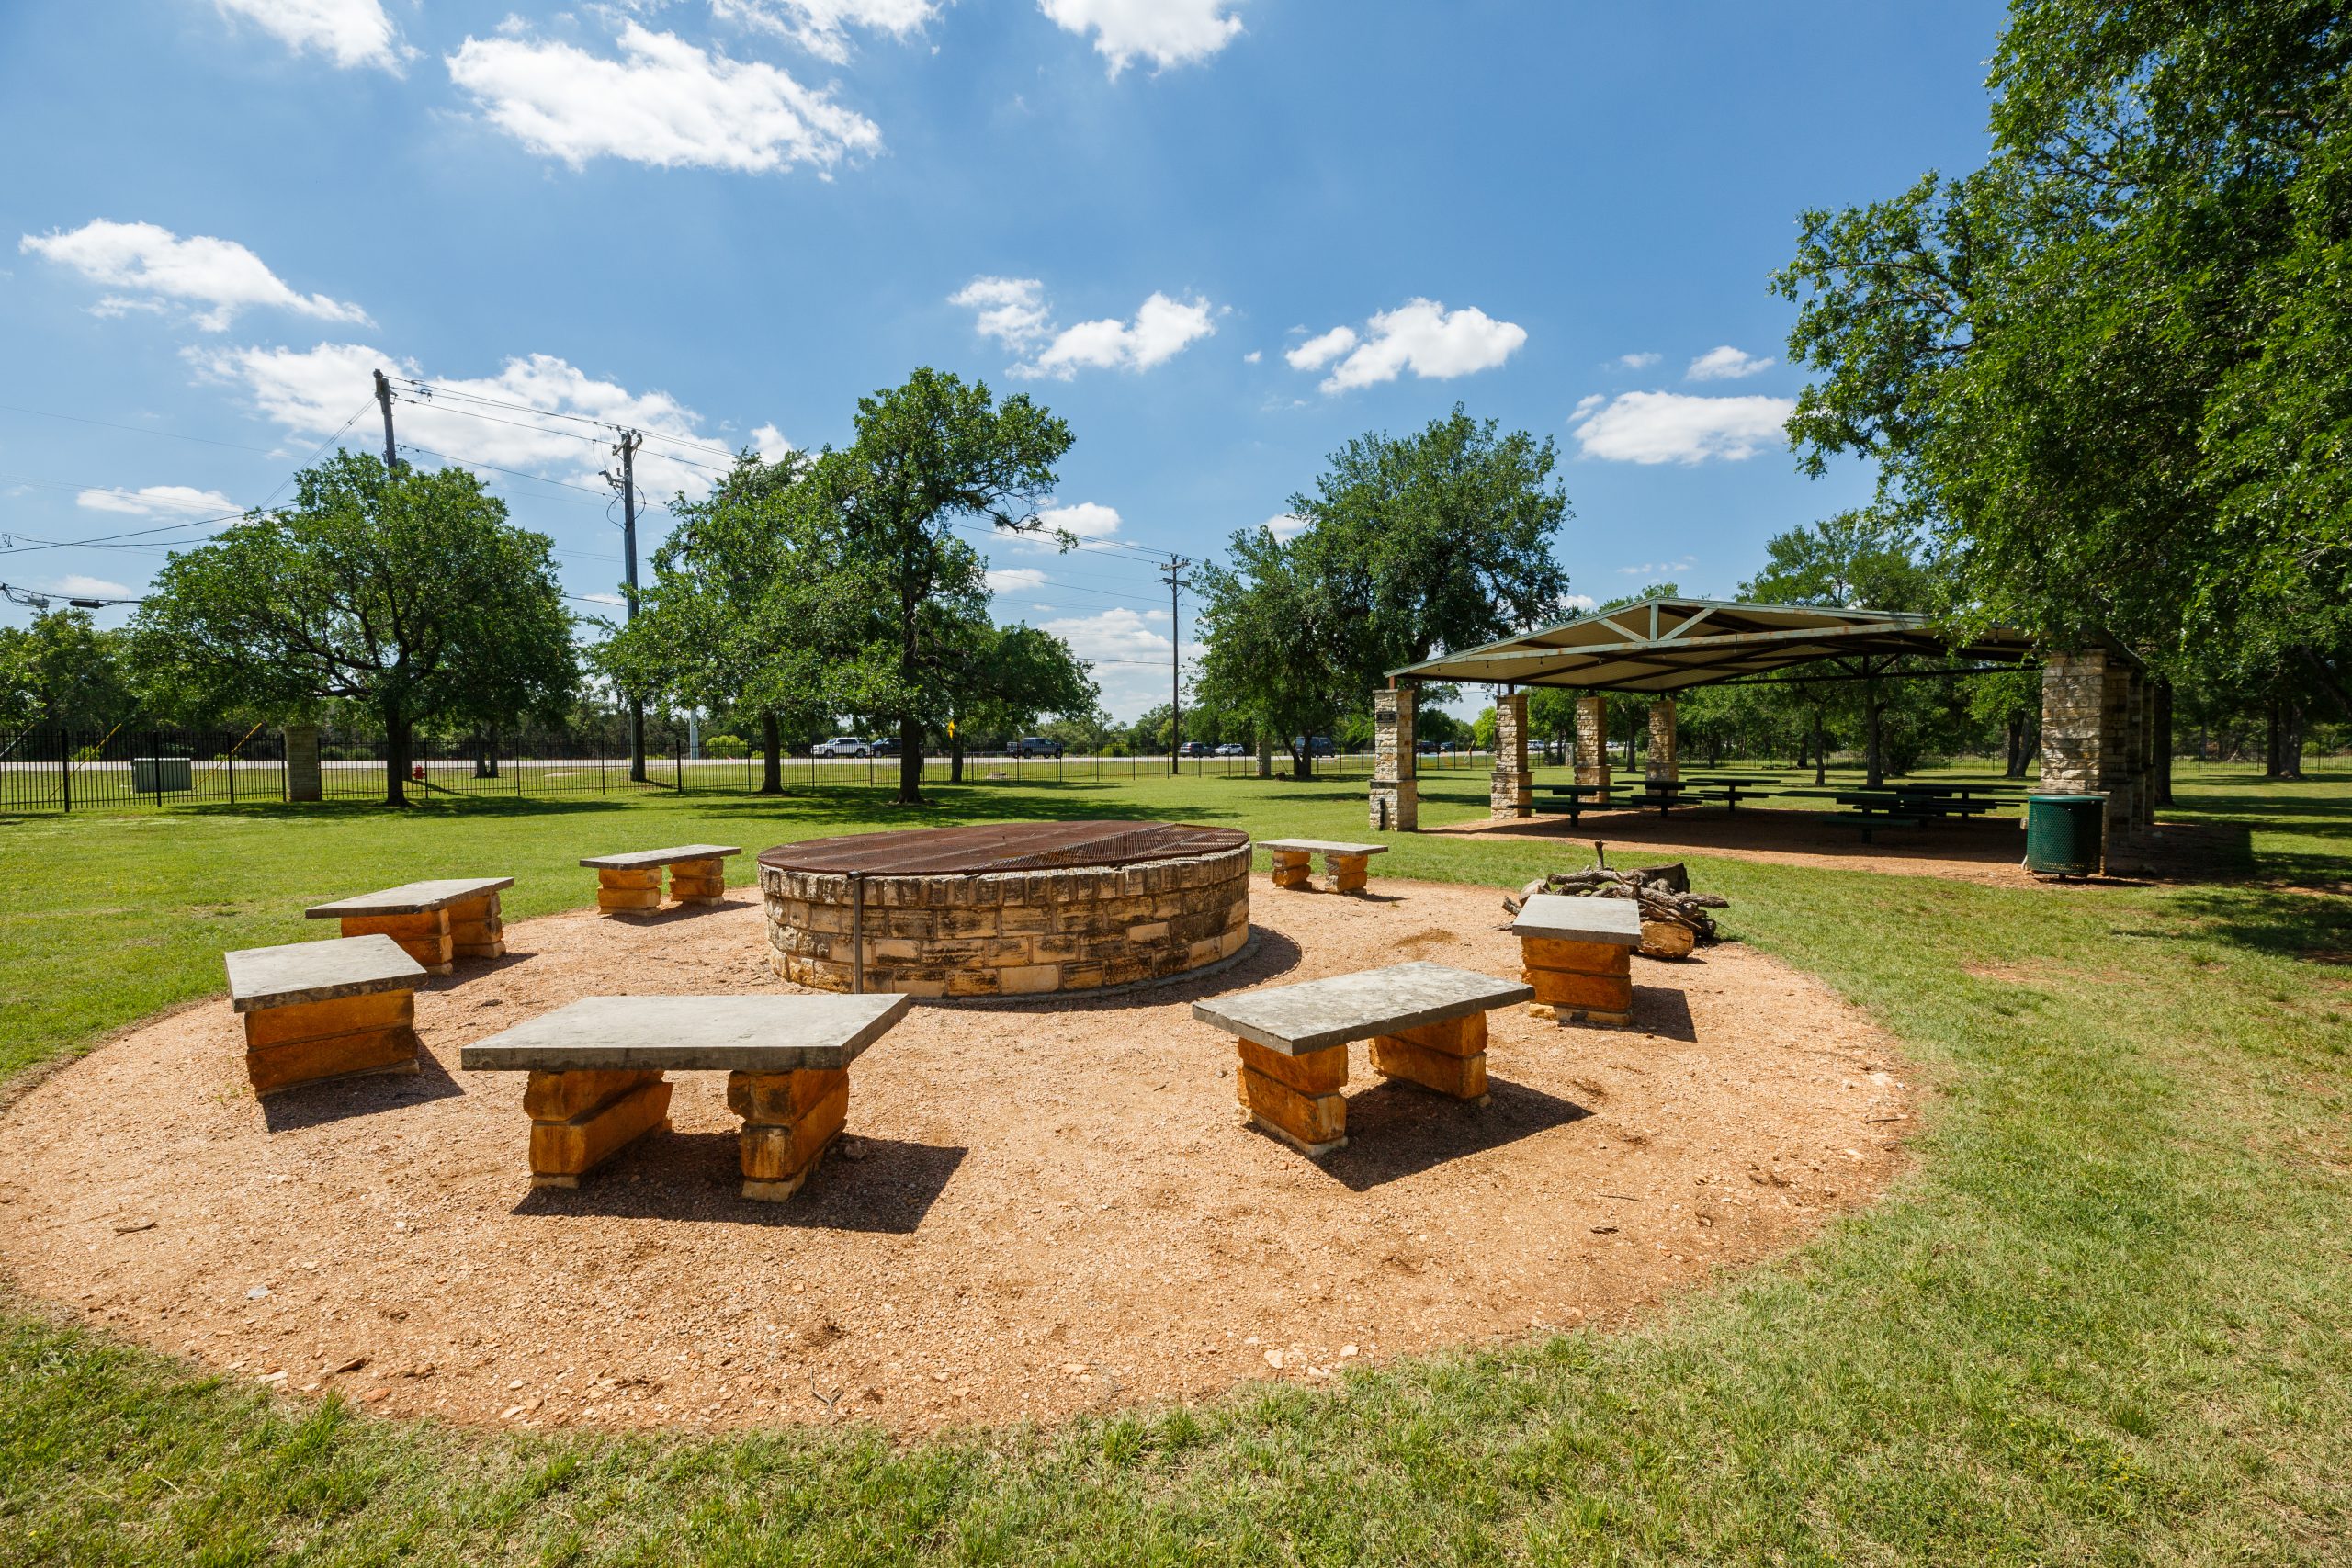 Square Foot Photography, community gathering space with circular bench seating and covered dining tables